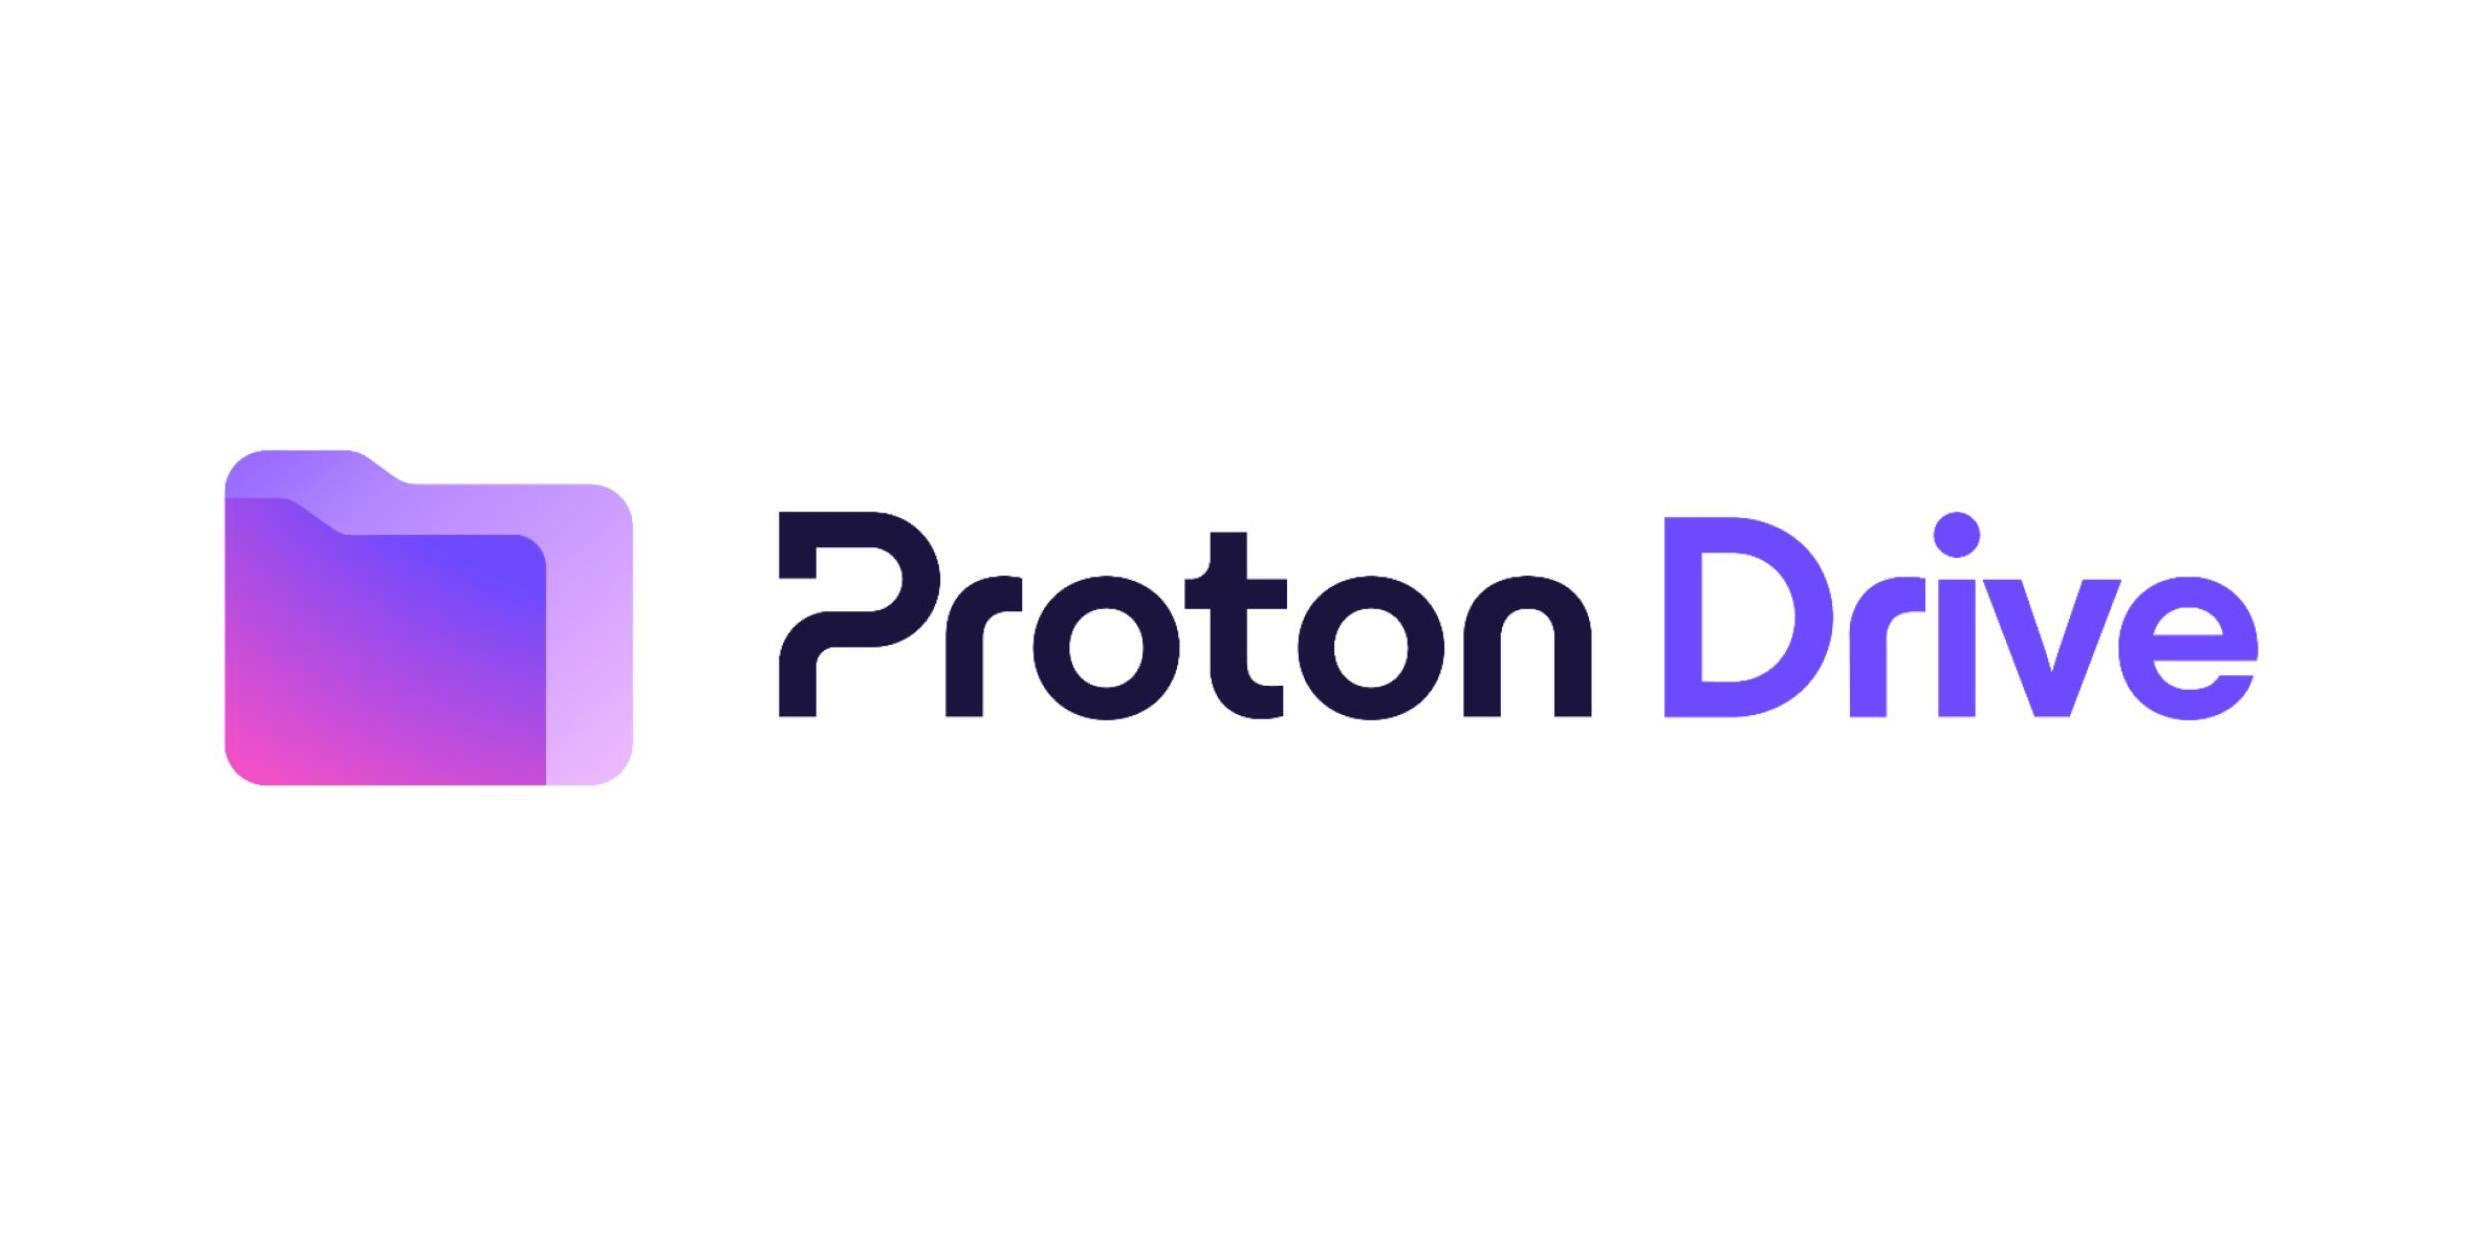 How to Fix "Cannot Upload: File No Longer Exists" Error on Proton Drive ? 2